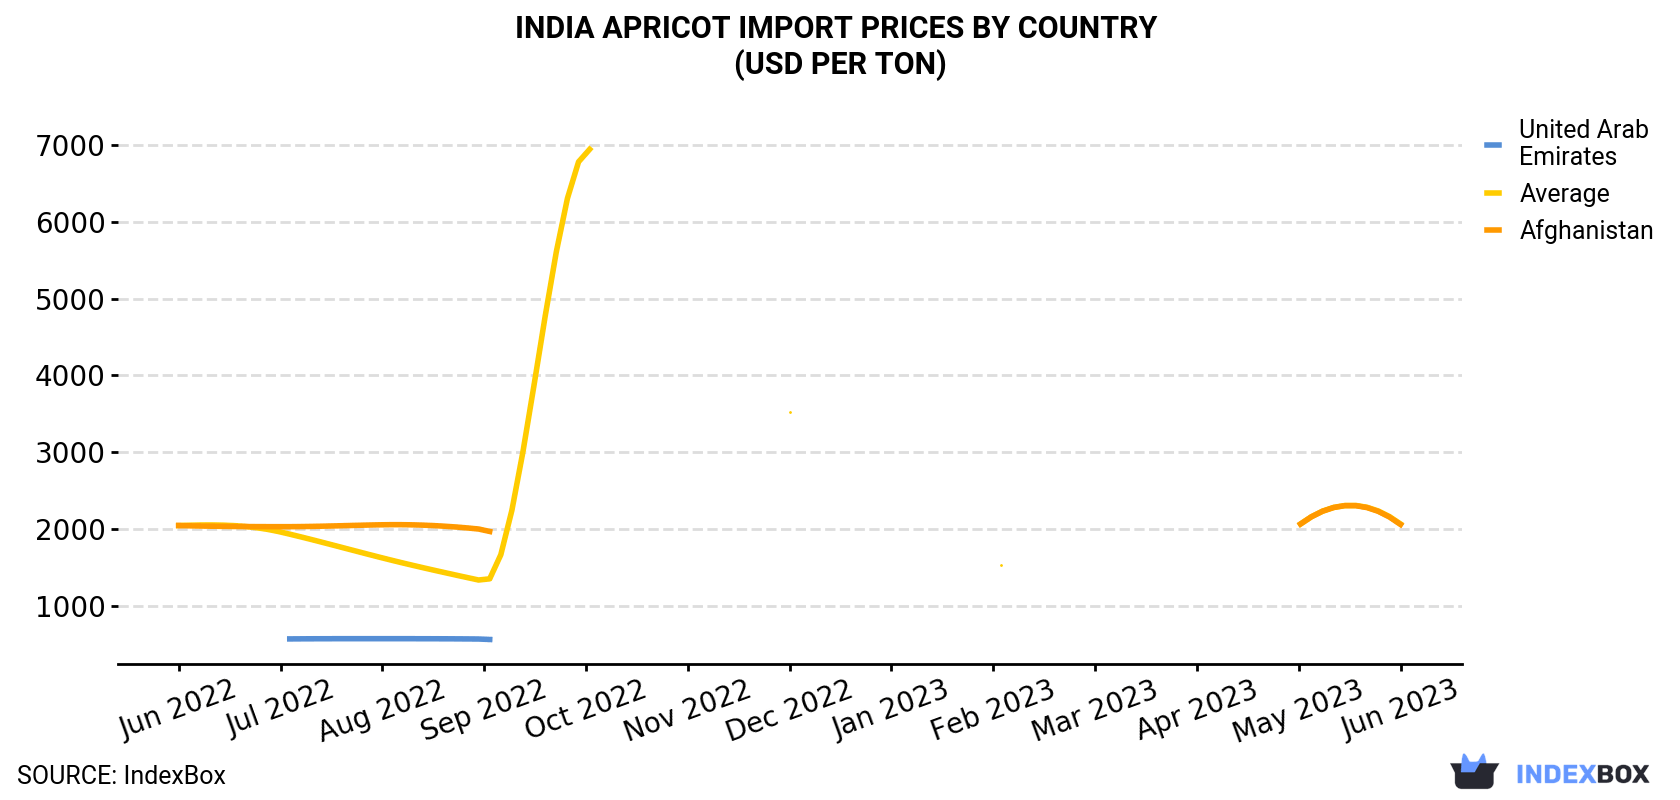 India Apricot Import Prices By Country (USD Per Ton)